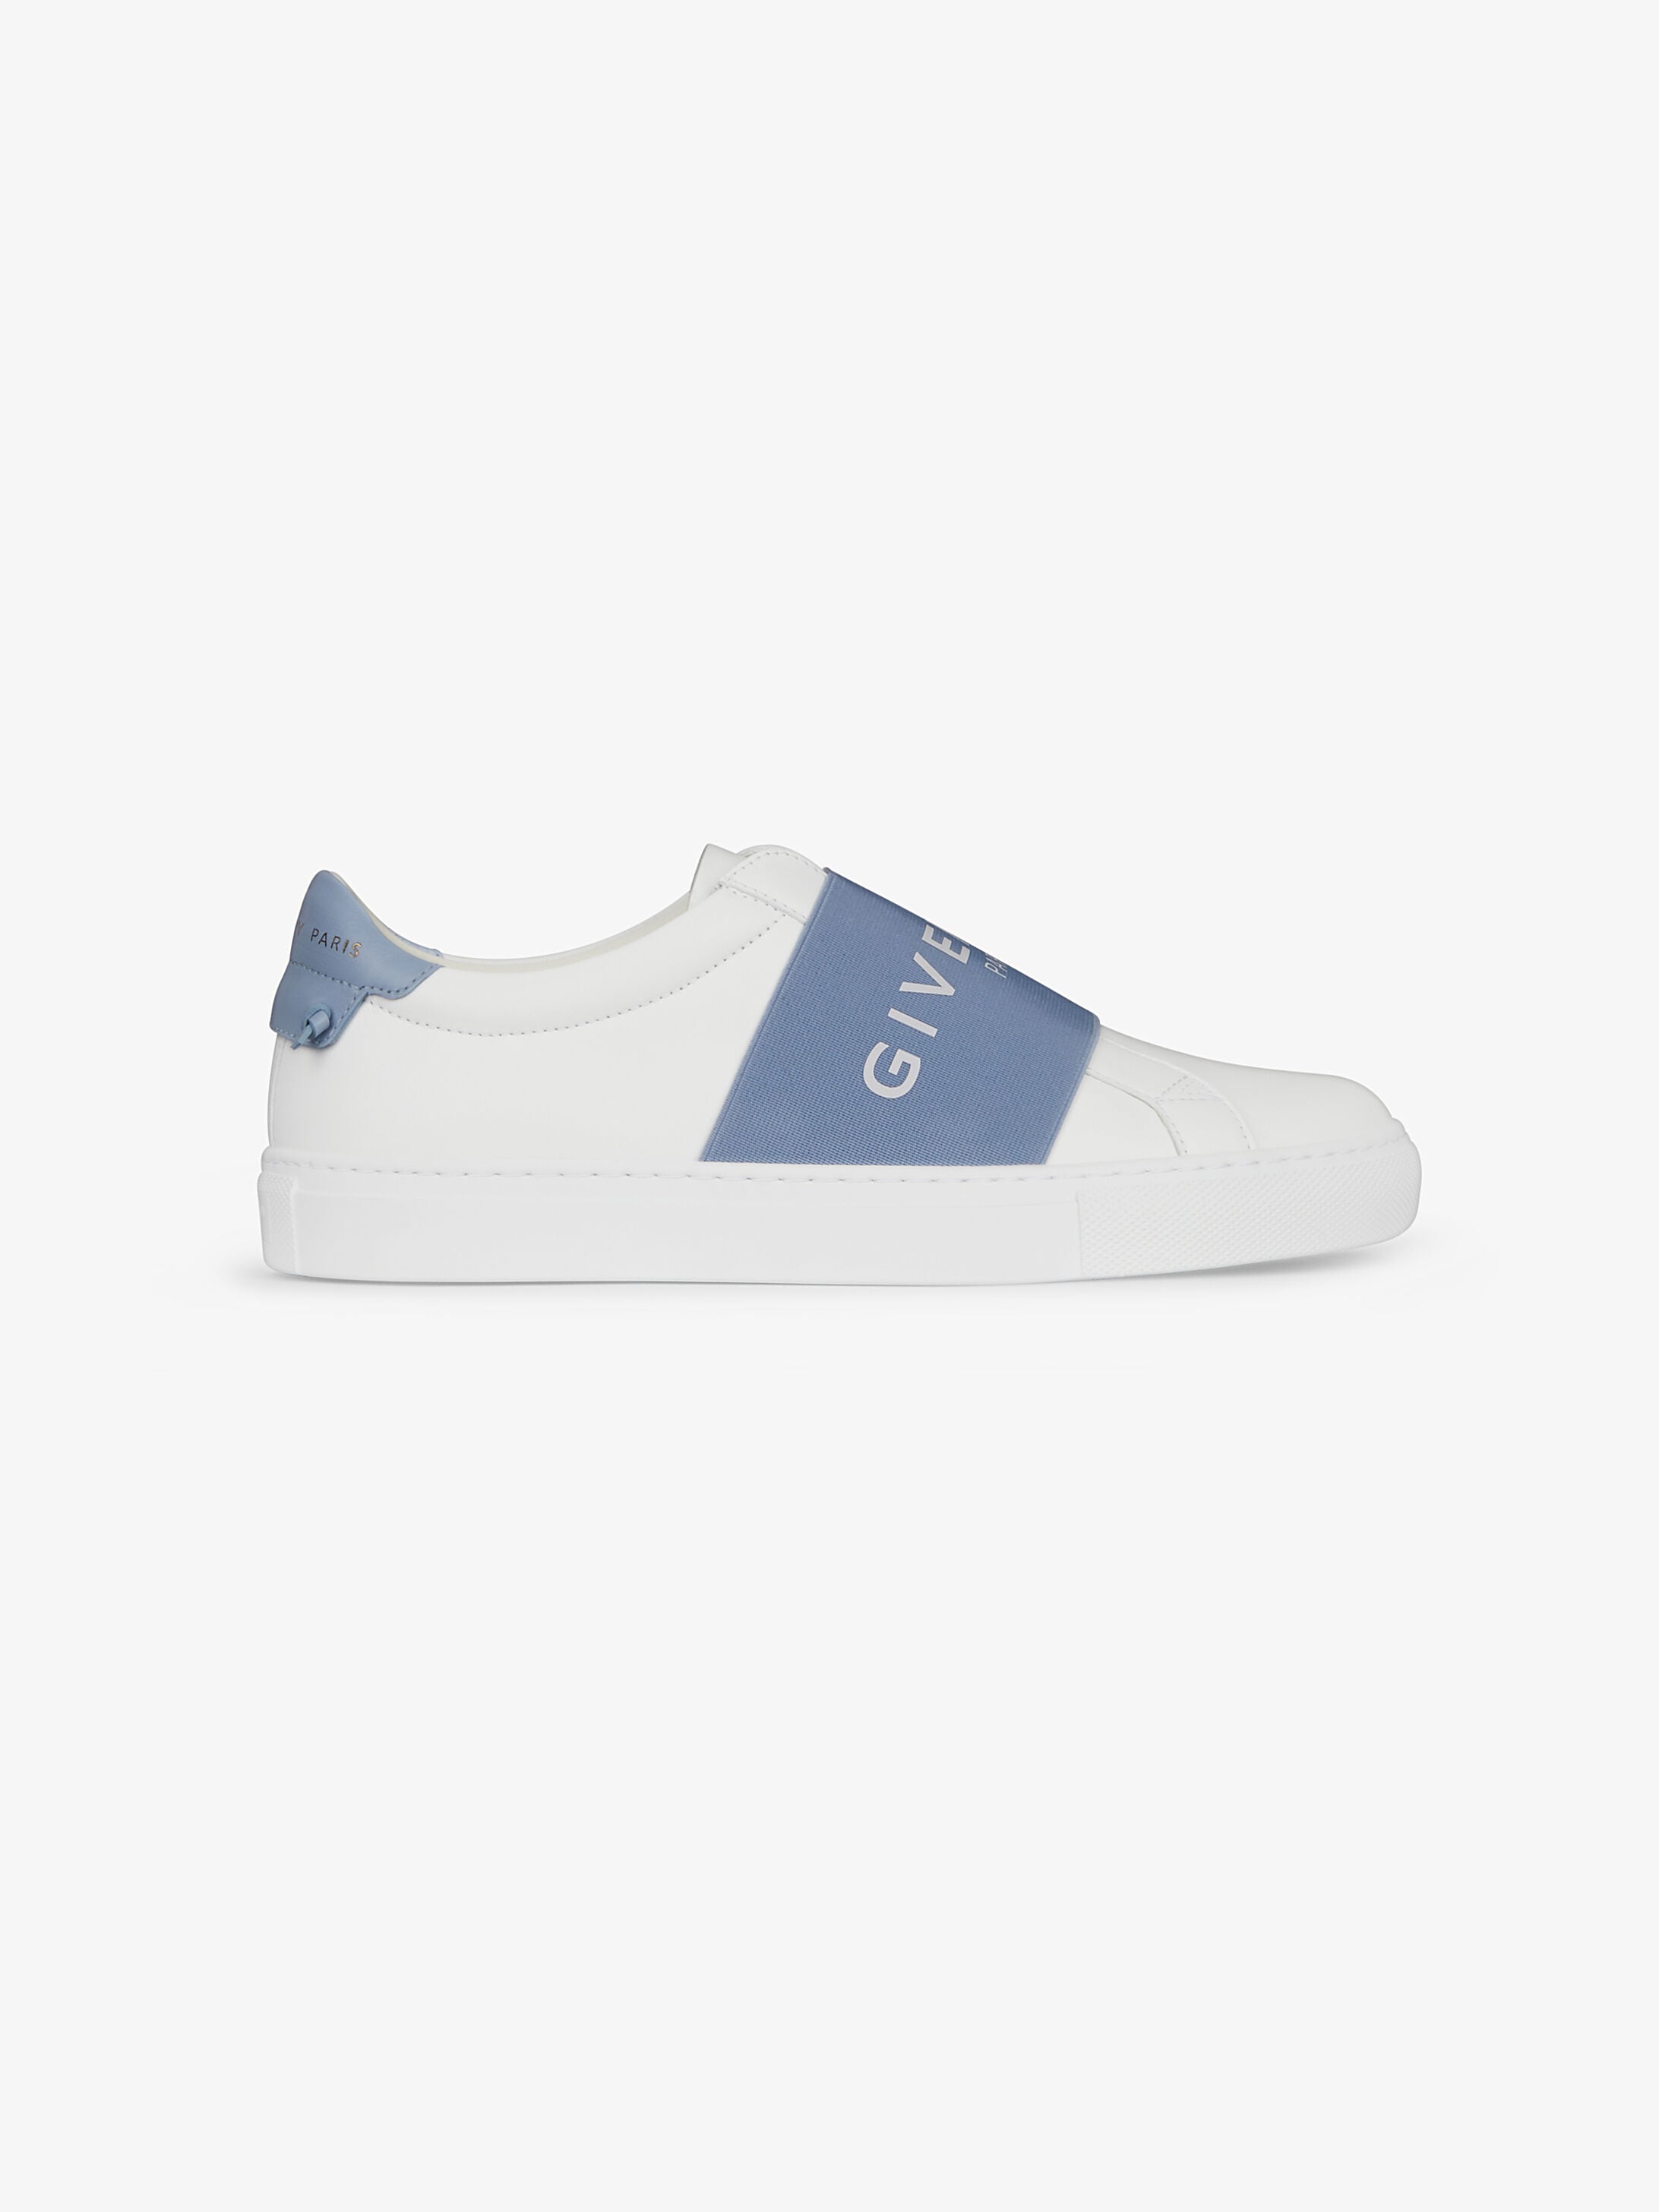 Women's Sneakers collection by Givenchy 